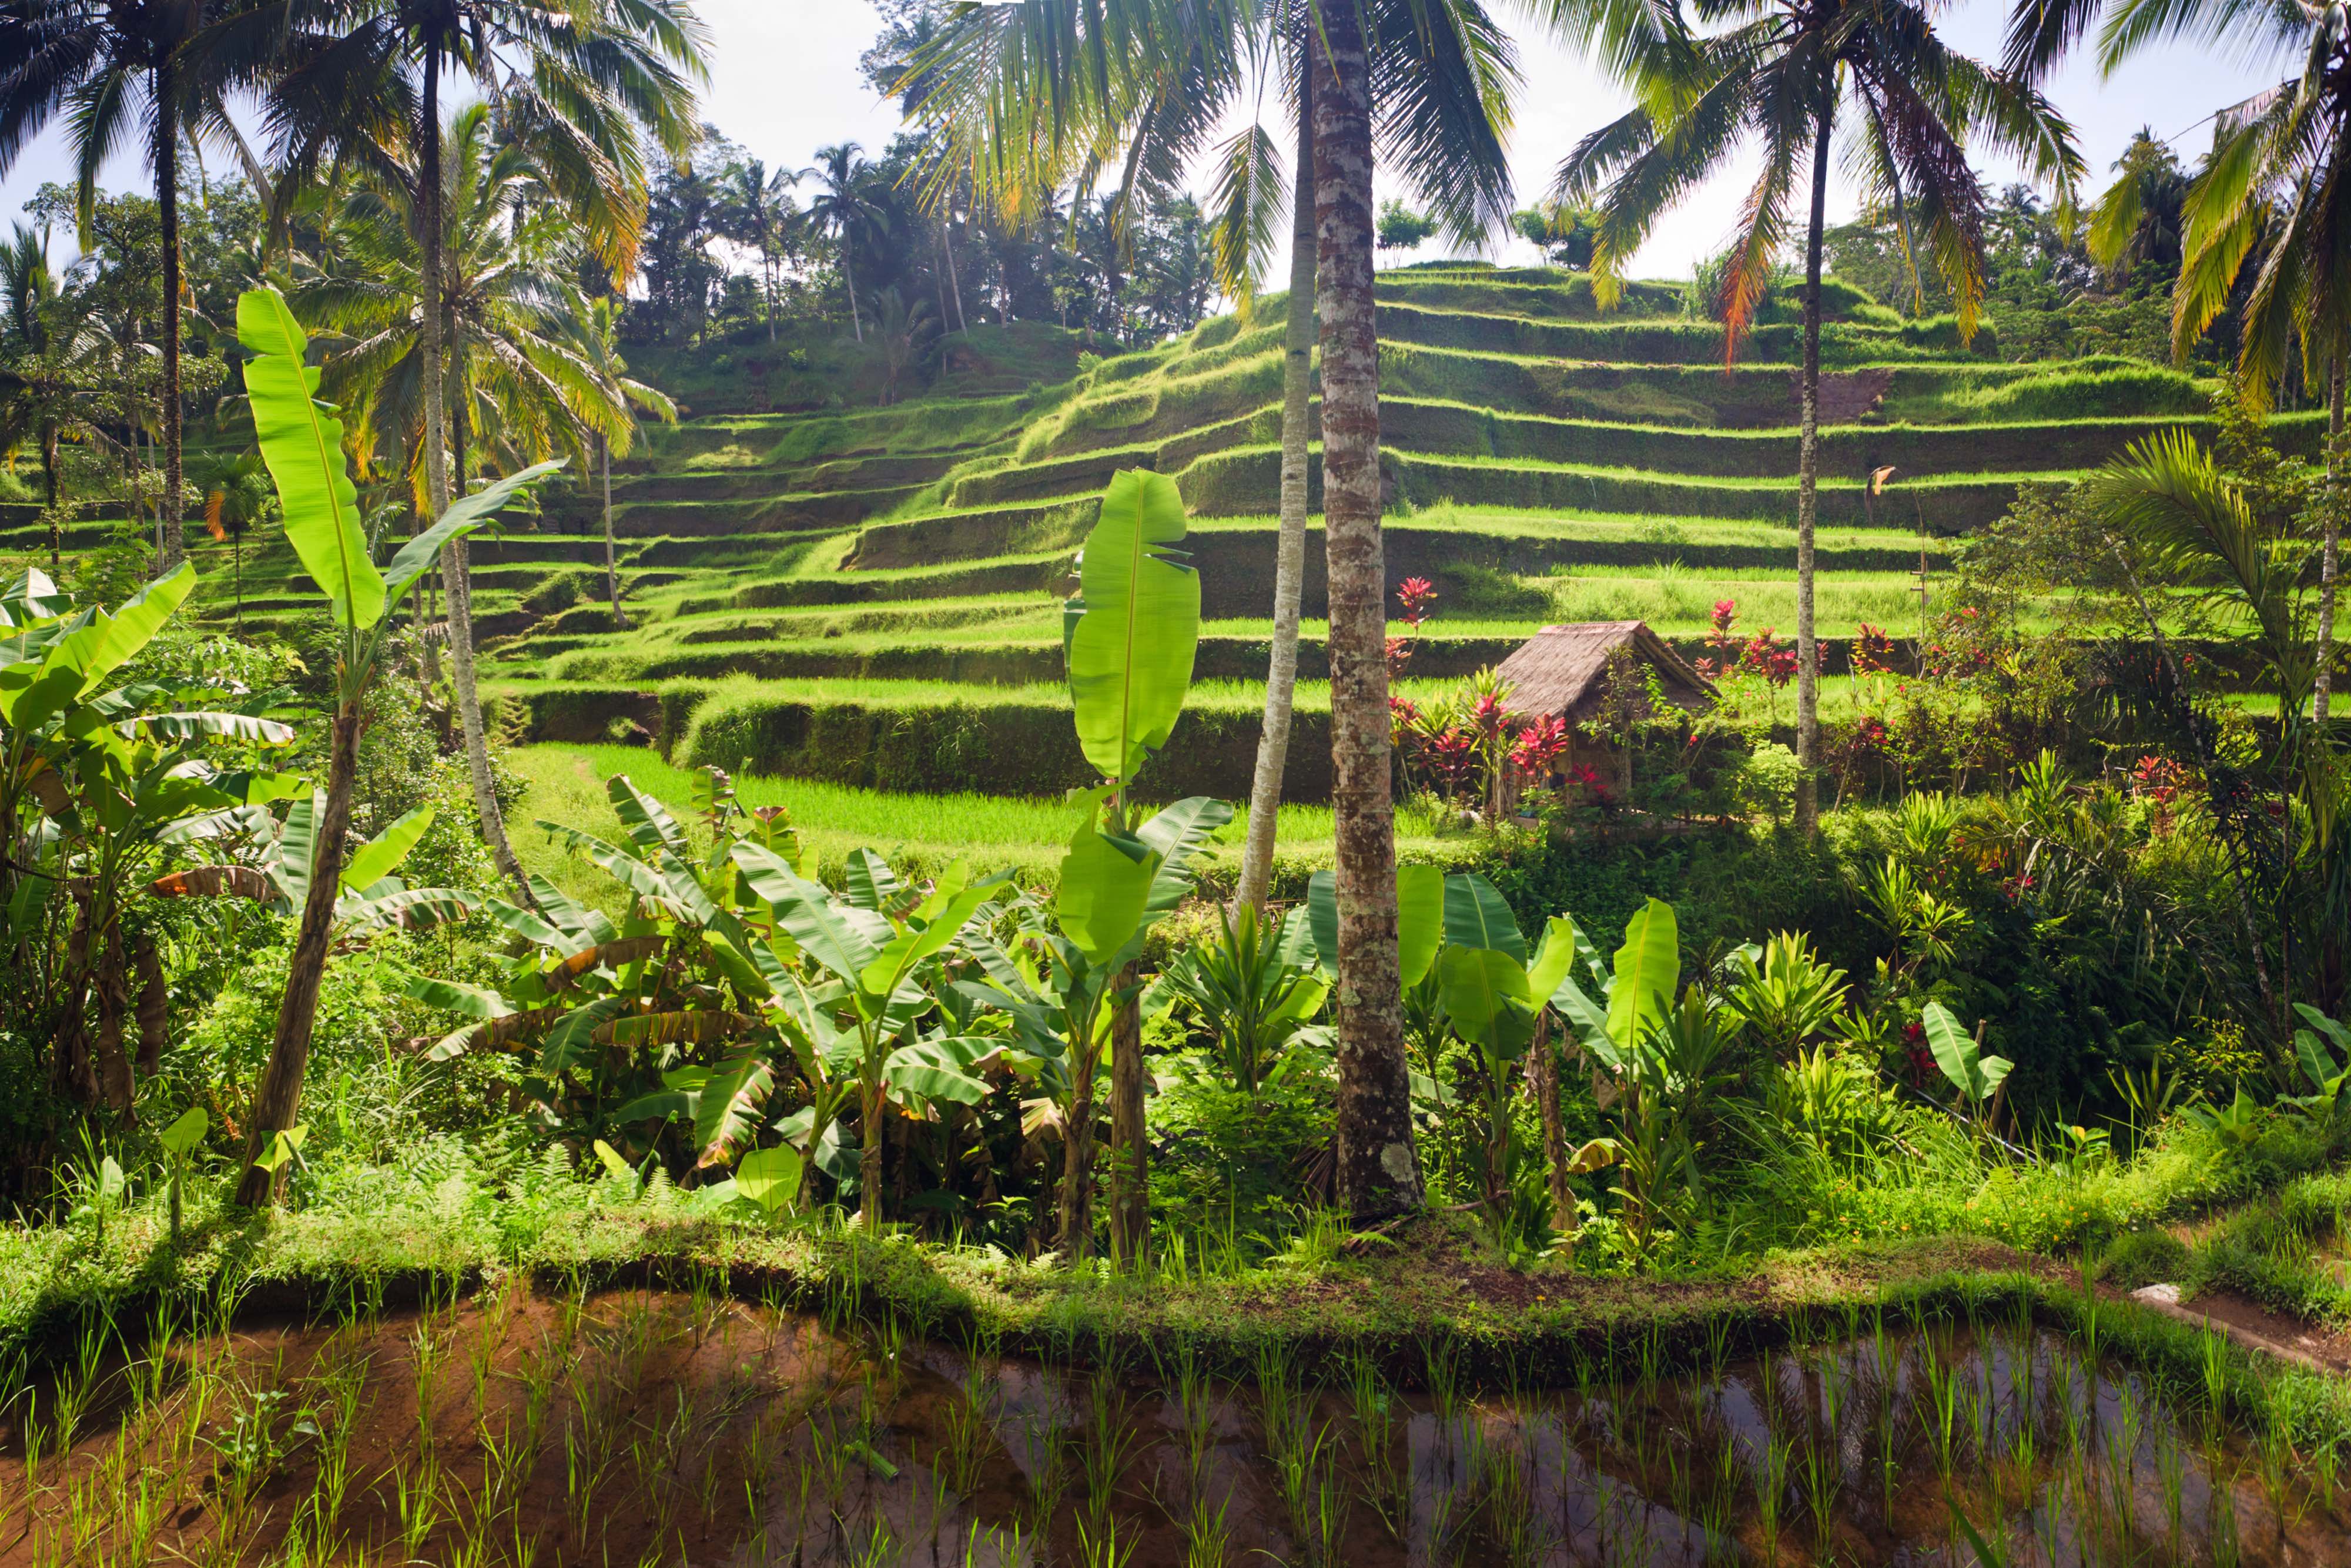 Terrace rice fields in Tegallalang, Ubud on Bali, Indonesia.